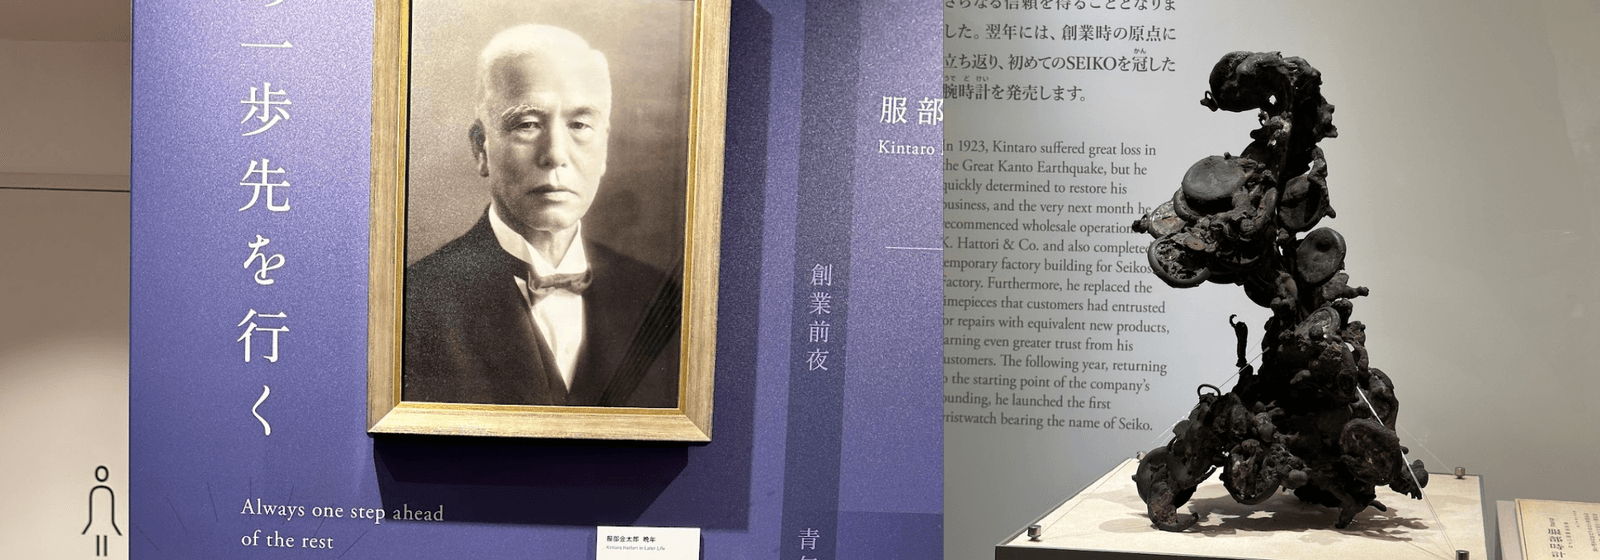 The Grand Seiko Ginza Museum: Japanese Watchmaking History